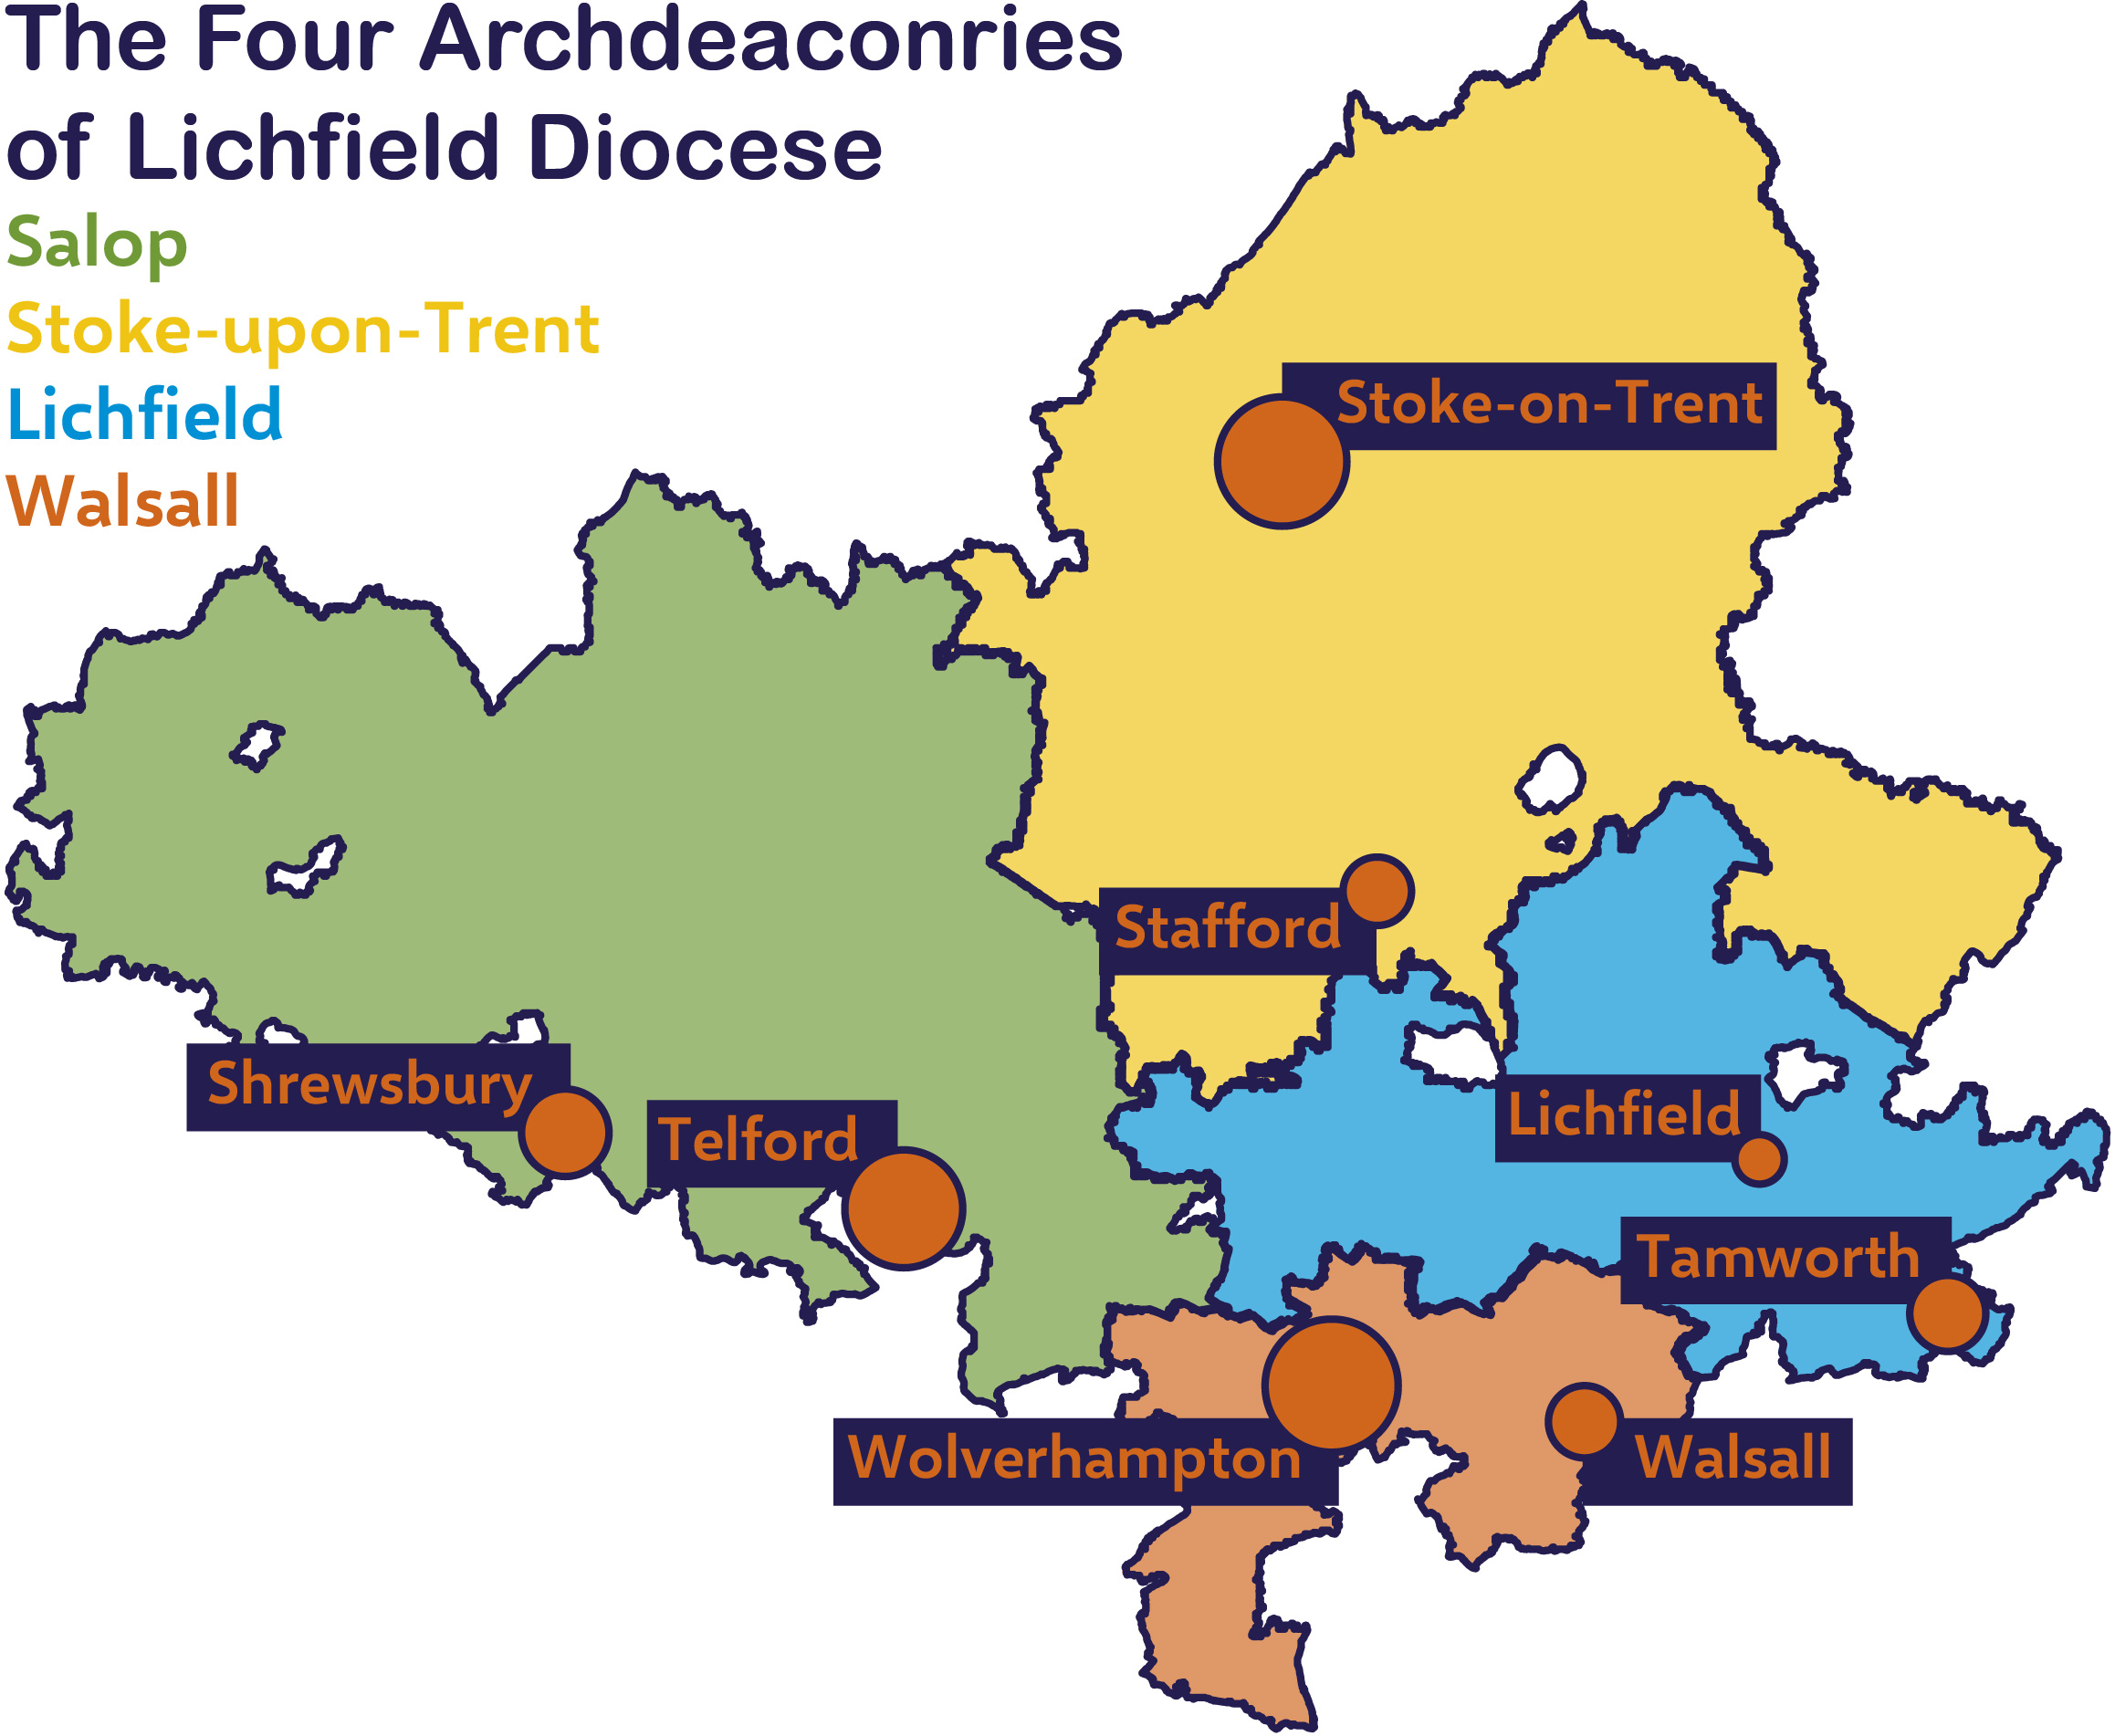 map showing the four archdeaconries of the Diocese and the key towns.